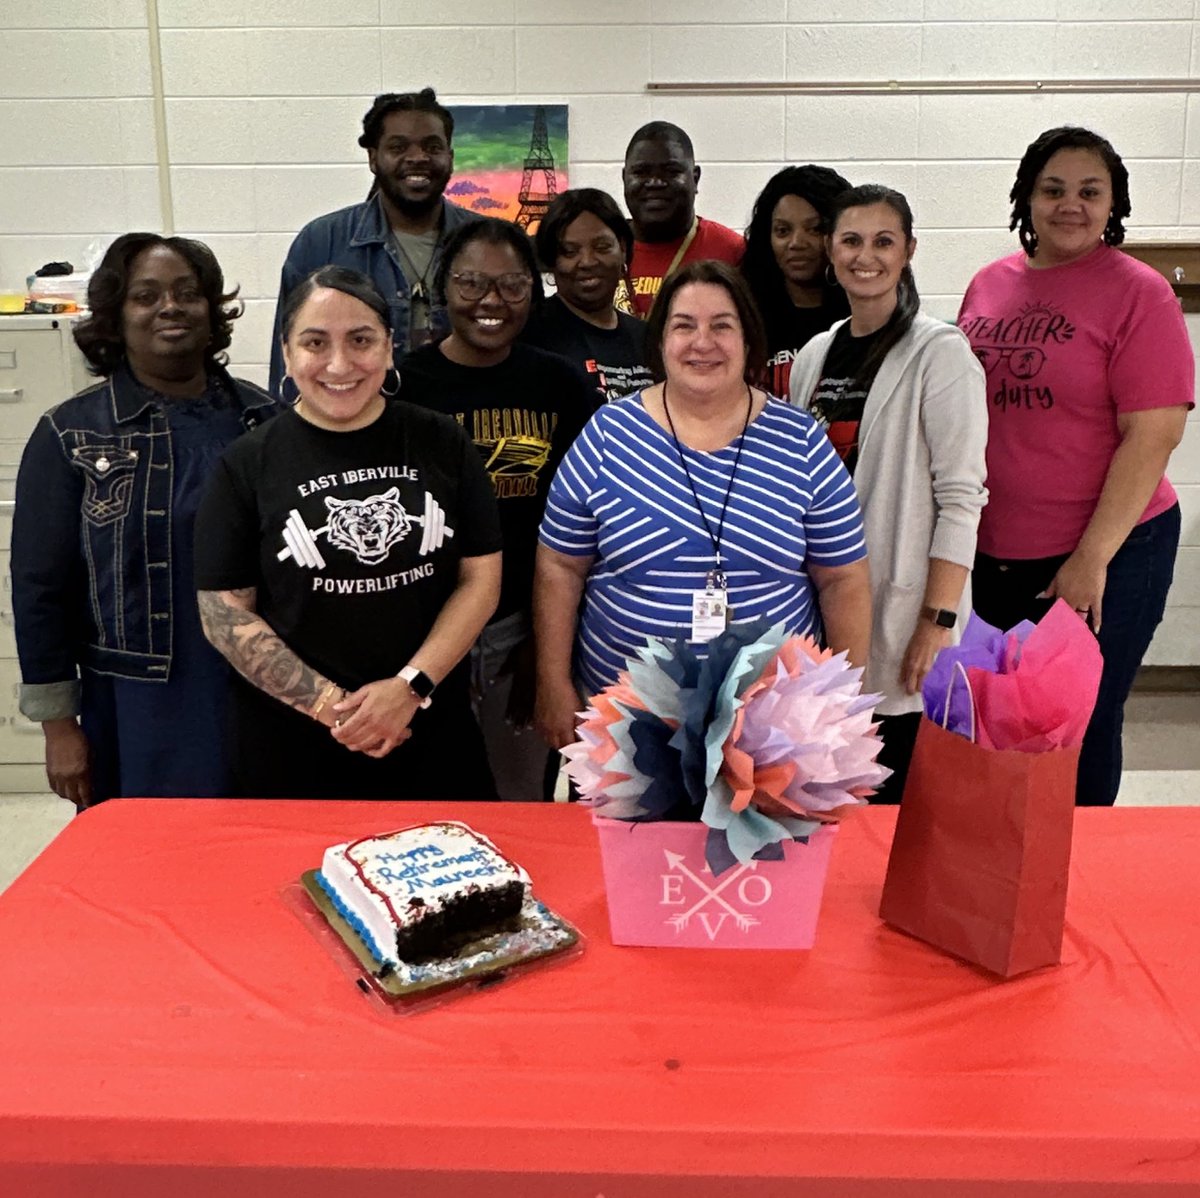 The Diverse Learners Department and the rest of the faculty, staff, and students at East Iberville would like to congratulate Mrs. Edwards on her retirement this year! We will miss you! 

#EmpoweringMinds #IgnitingFutures #EIproud #TigerPride #onceatigeralwaysatiger